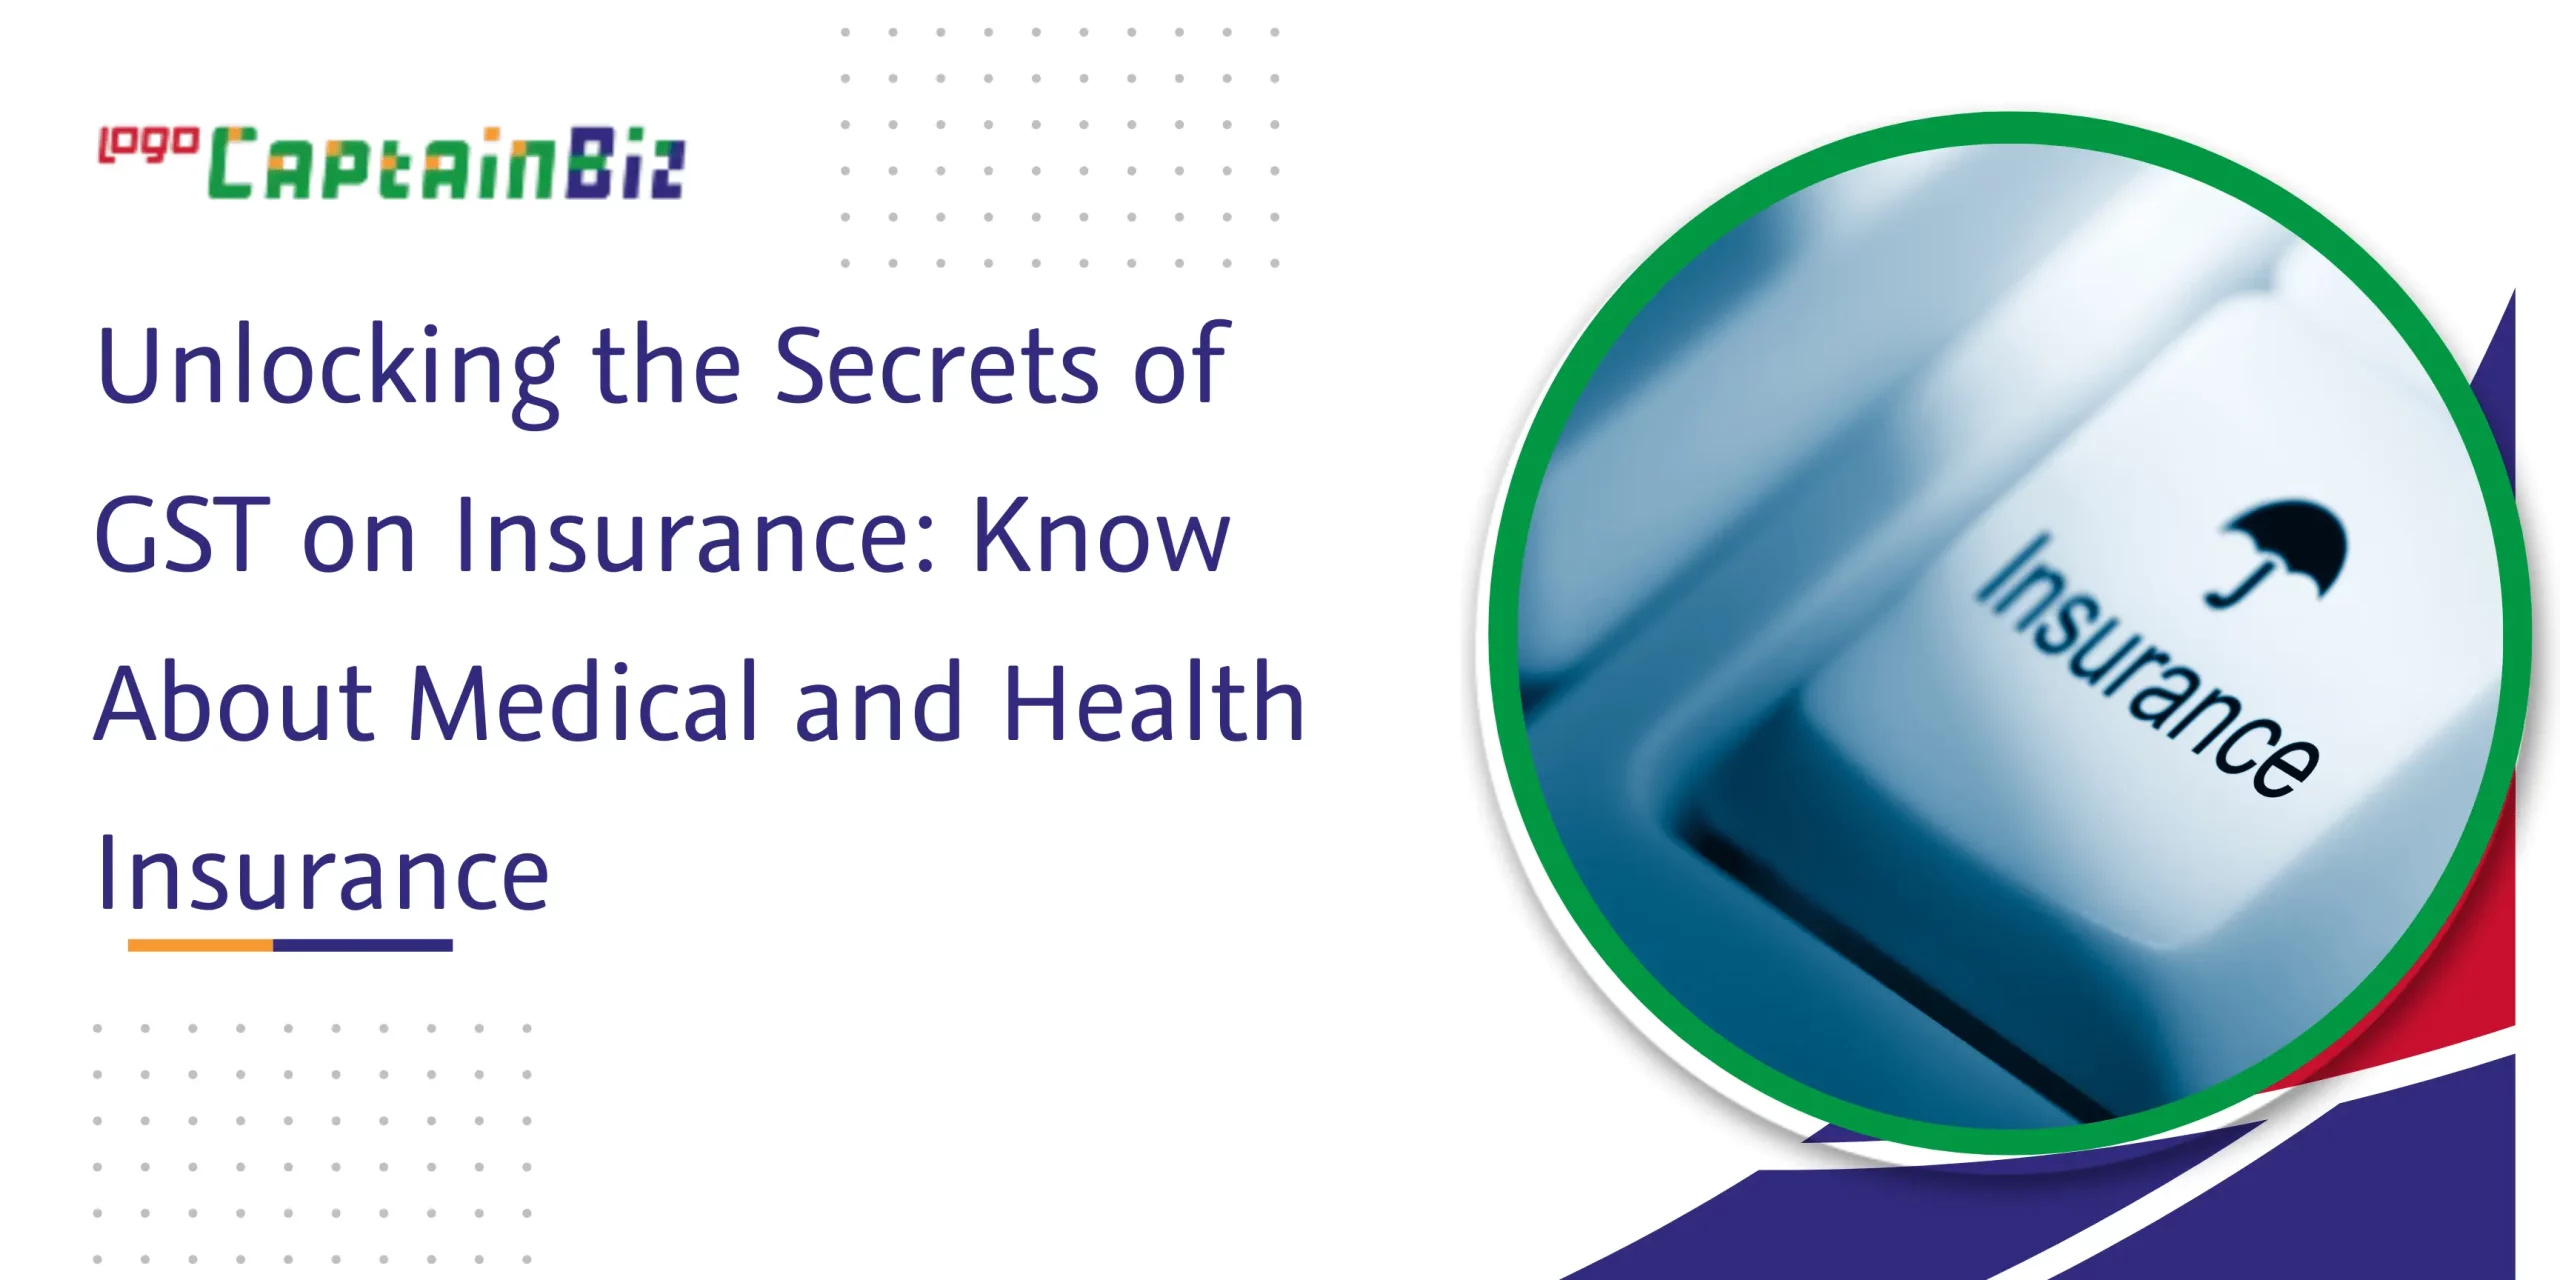 CaptainBiz: unlocking the secrets of gst on insurance: know about medical and health insurance